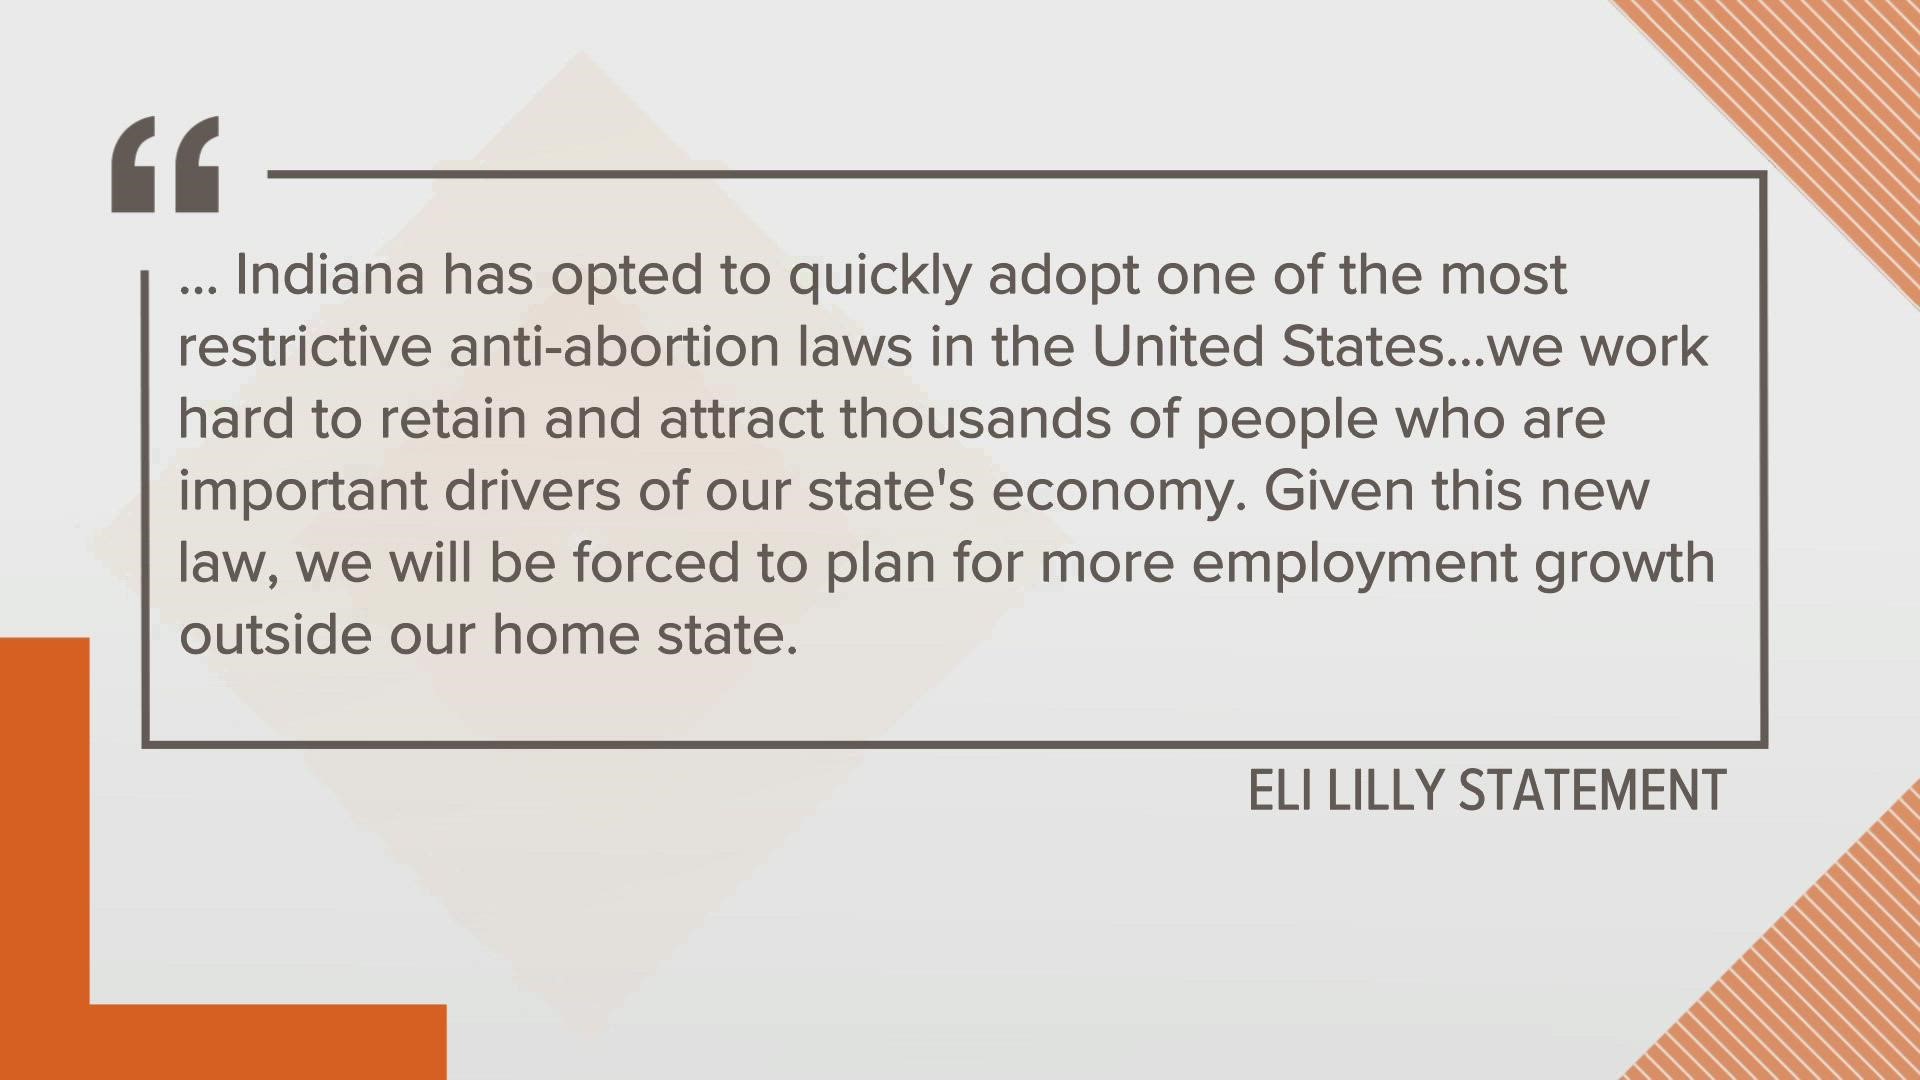 Eli Lilly and IU Health were among the first Indiana health care businesses to weigh in on how the state's new abortion ban will impact them.